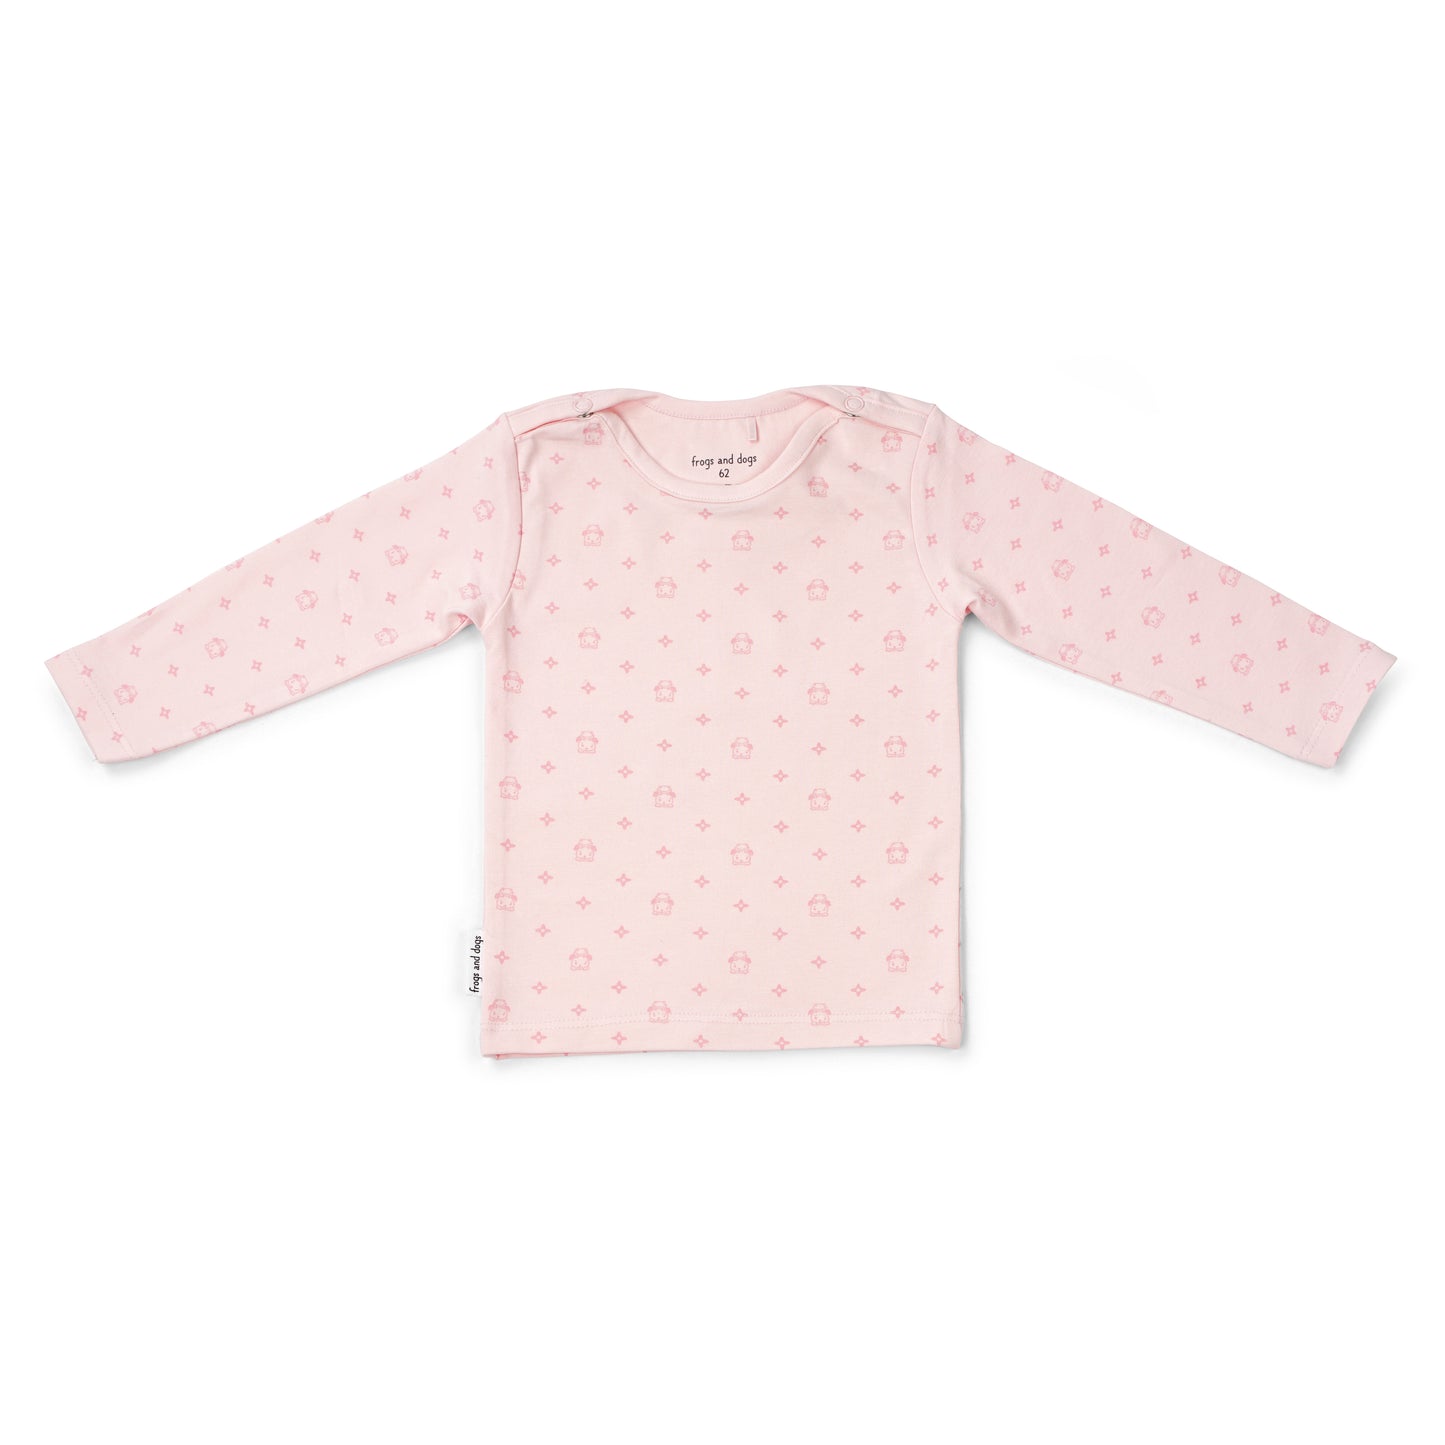 Frogs & Dogs - Shirt LS - Pink